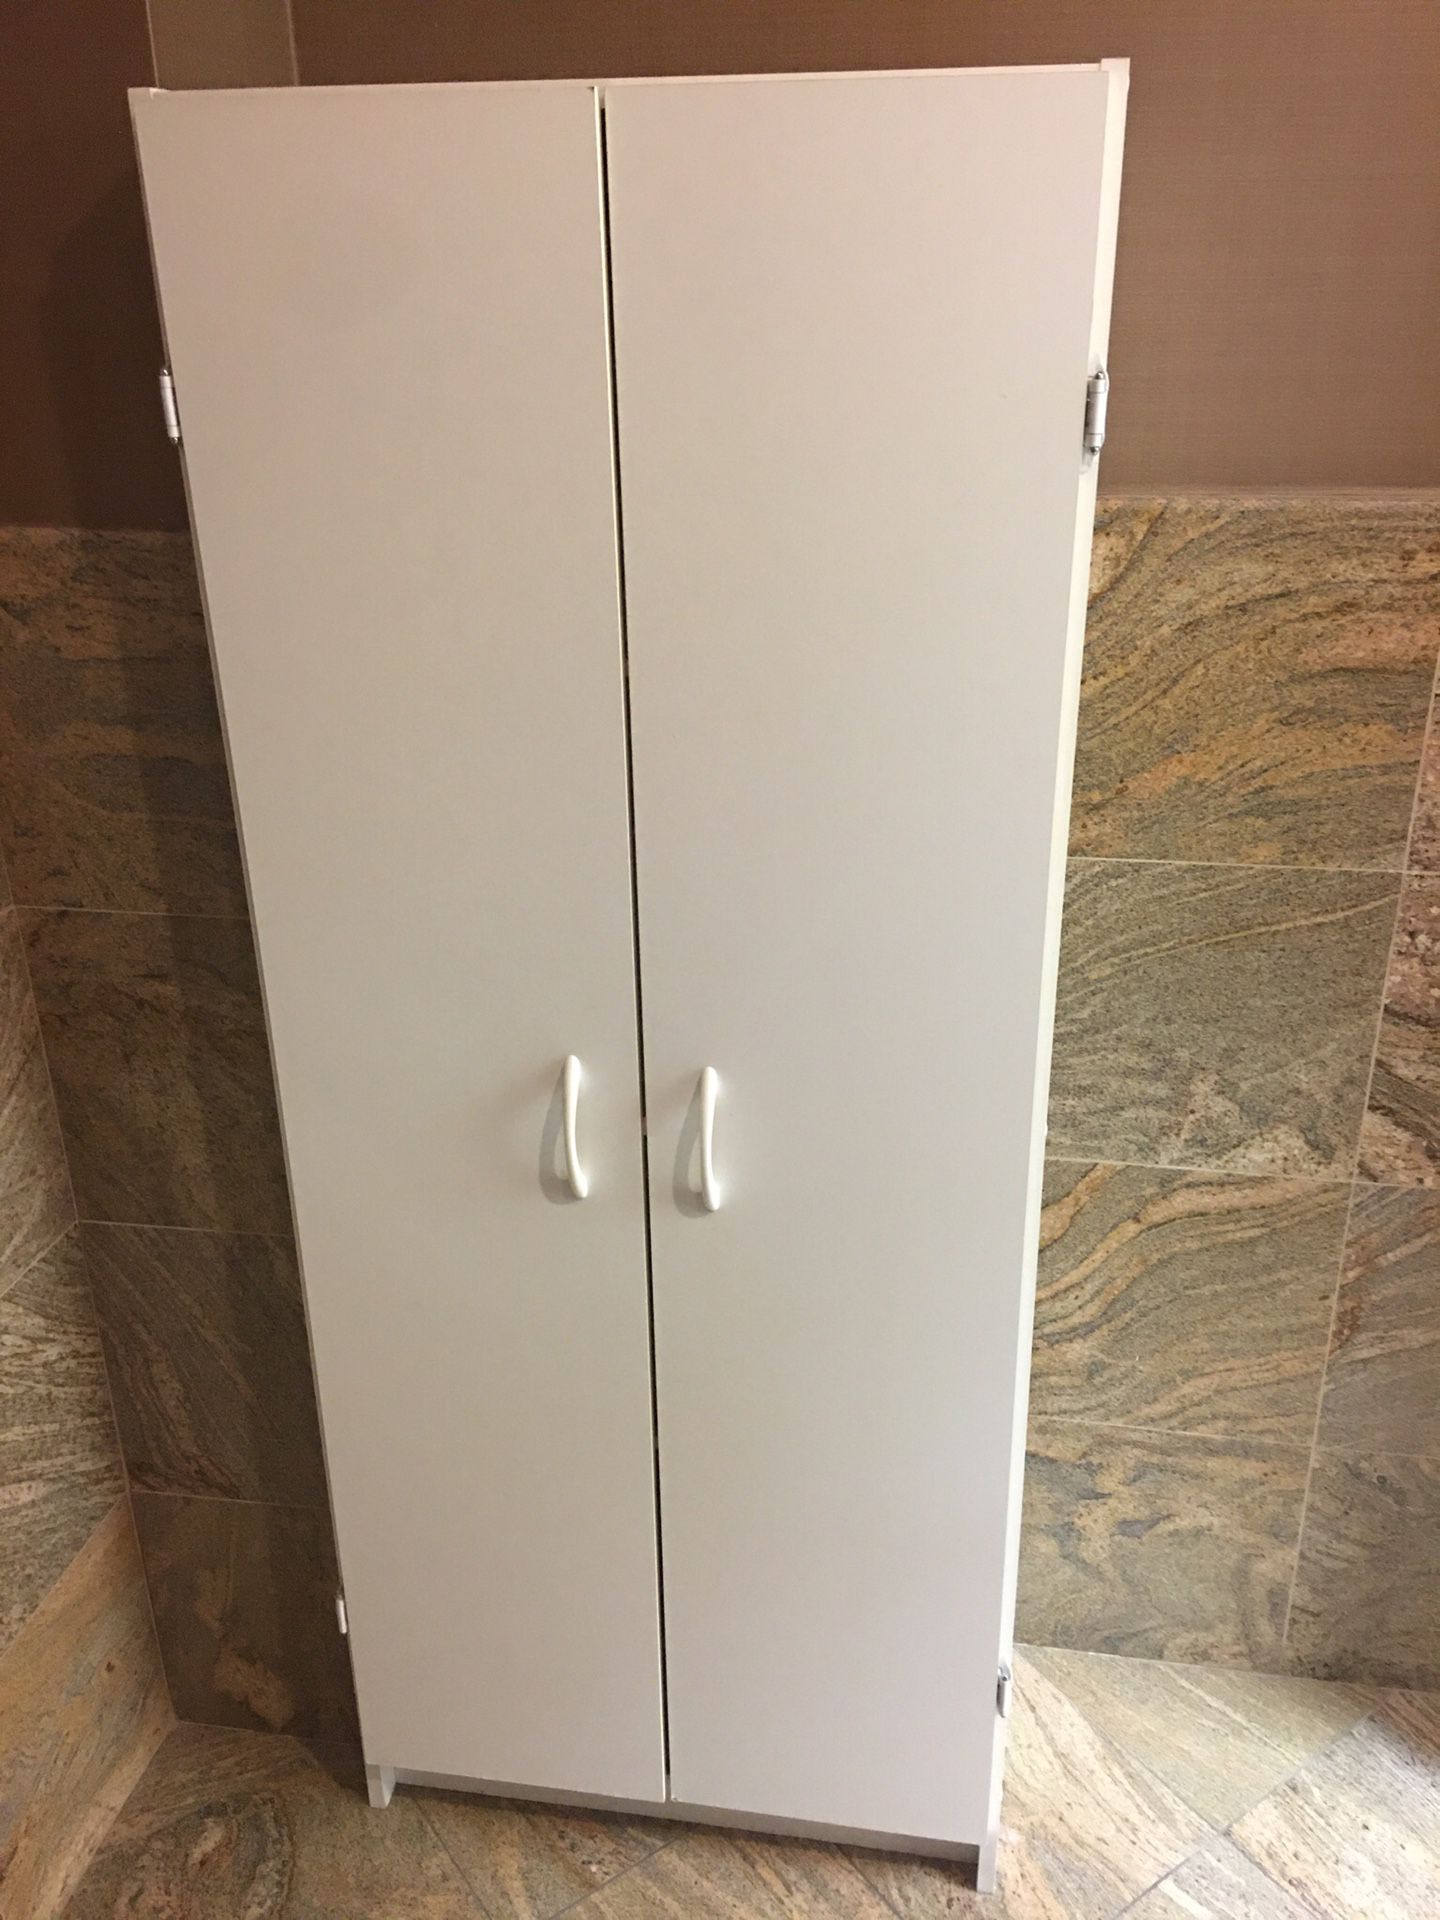 !!Update Reduced SALE Price!! White Wood Cabinet with Two Doors $115 OBO